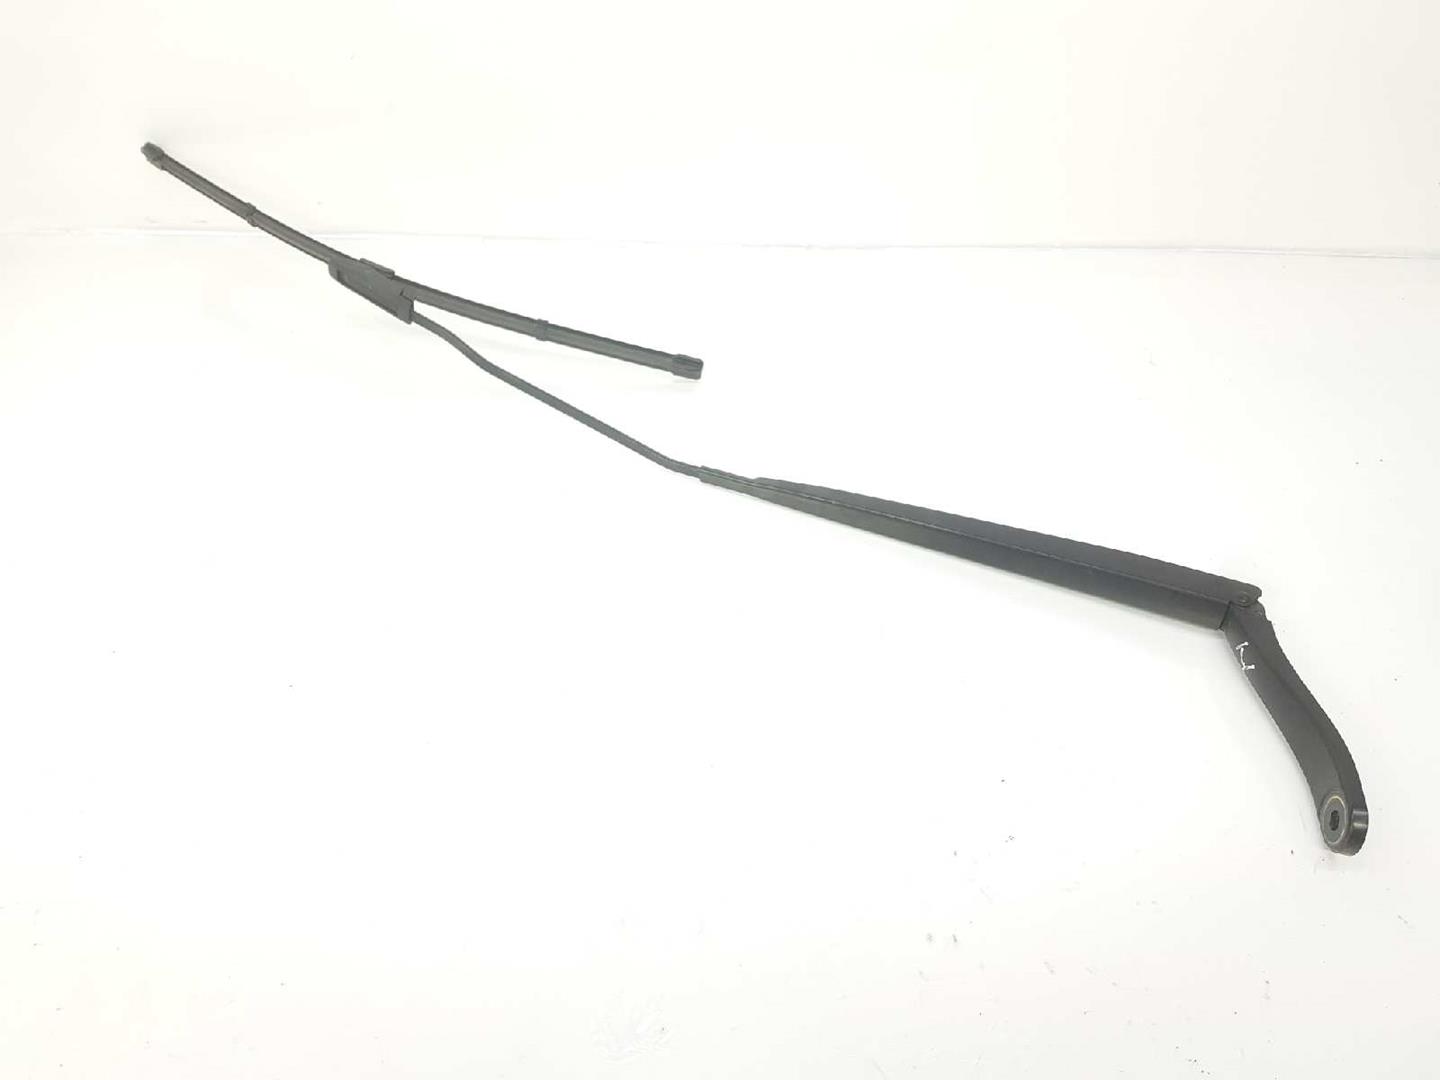 CITROËN Jumpy 2 generation (2007-2016) Front Wiper Arms 1615627180, 1615627180 19757930